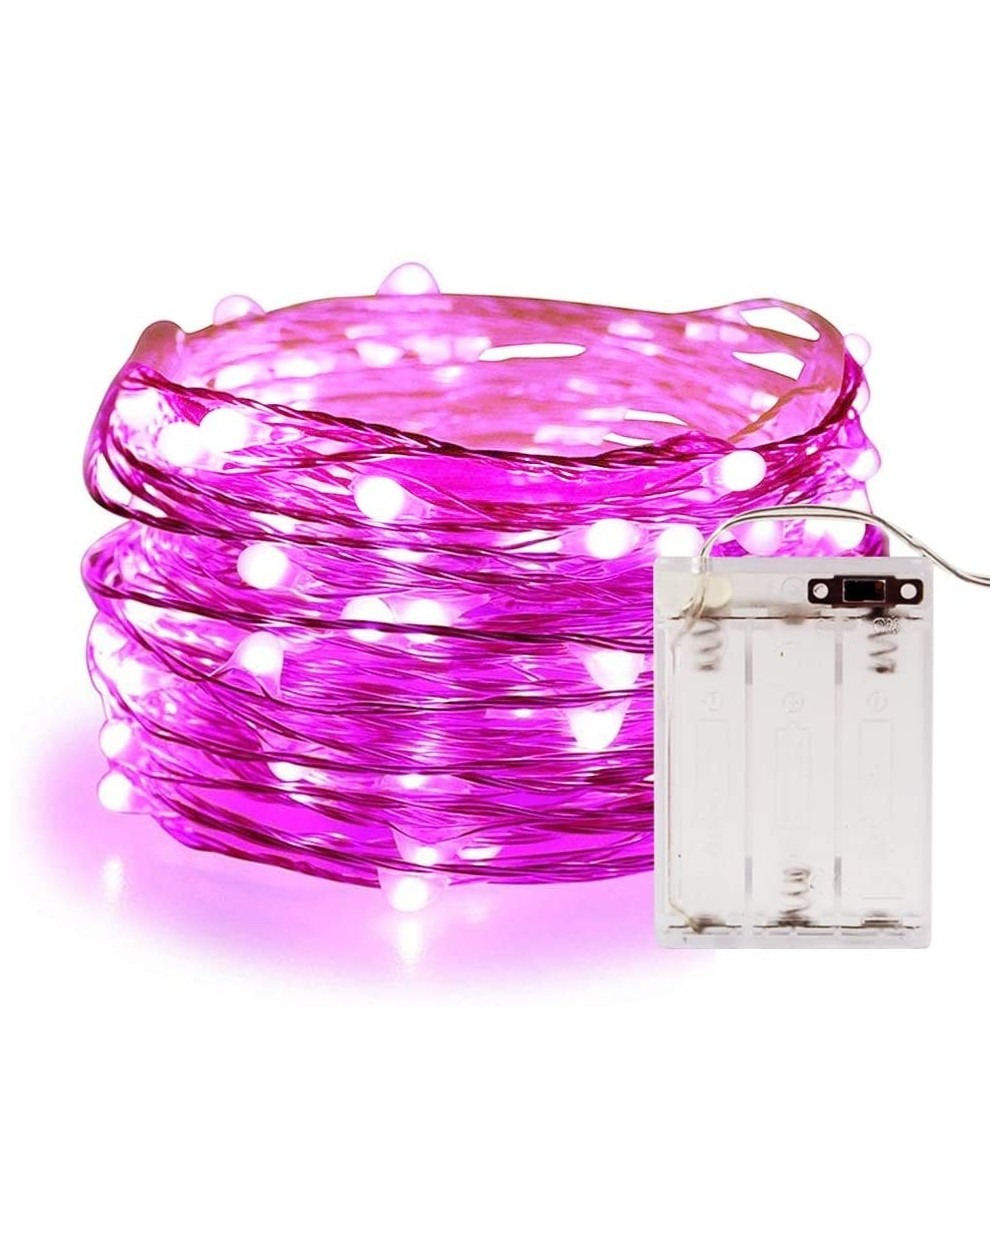 Indoor String Lights String Lights-10Ft/3M 30leds Bright light Party Home Festival Decorations Battery Operated Lights(Pink) ...